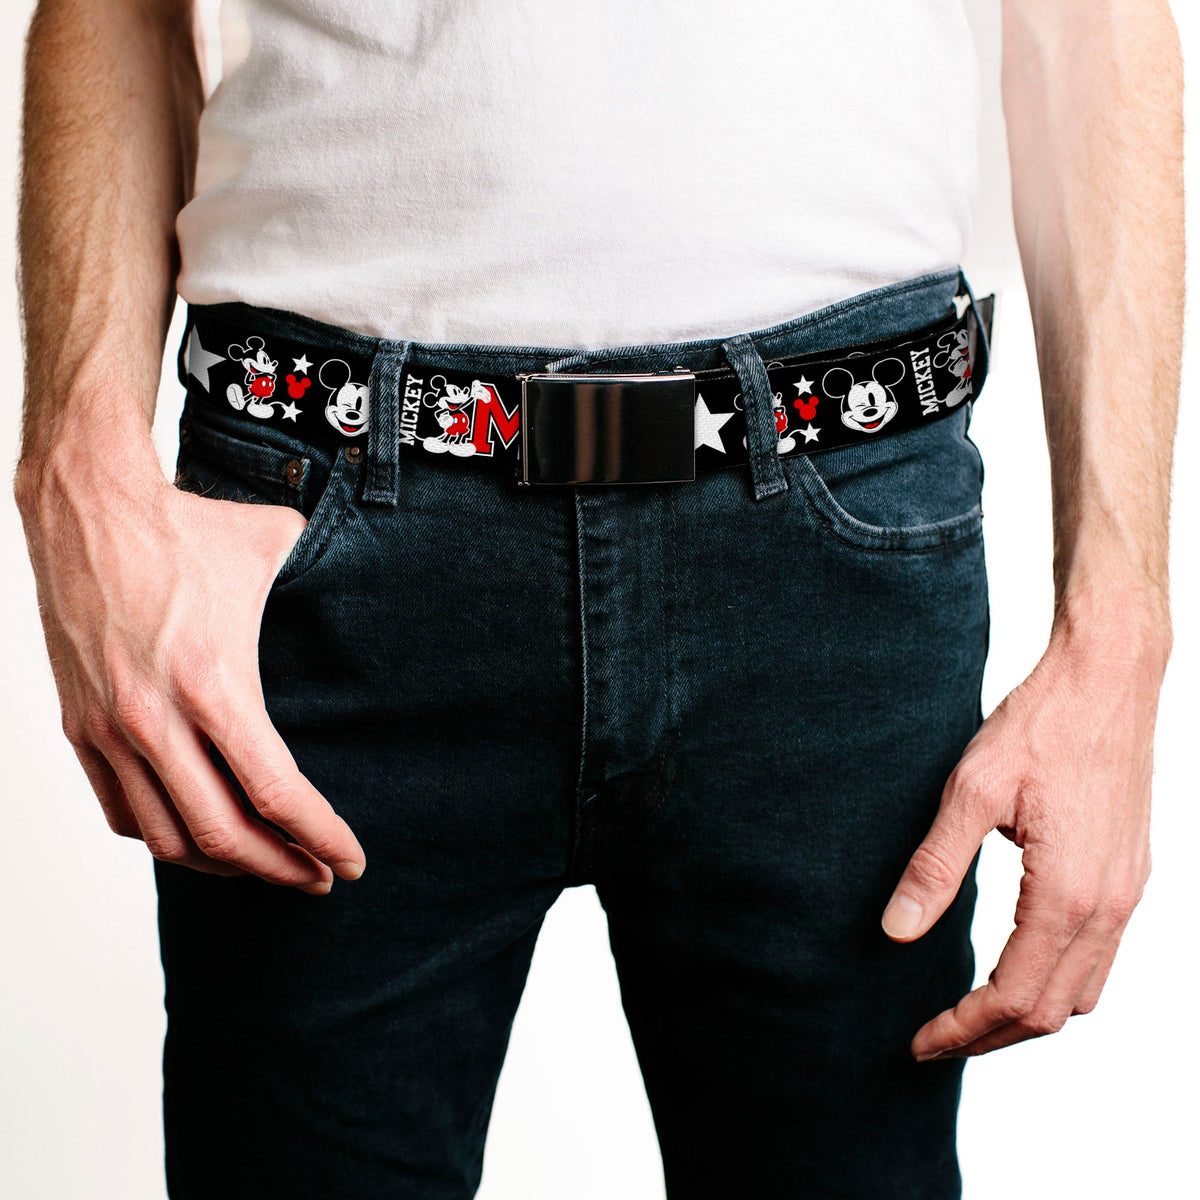 Chrome Buckle Web Belt - Classic Mickey Mouse 1928 Collage Black/White/Red Webbing